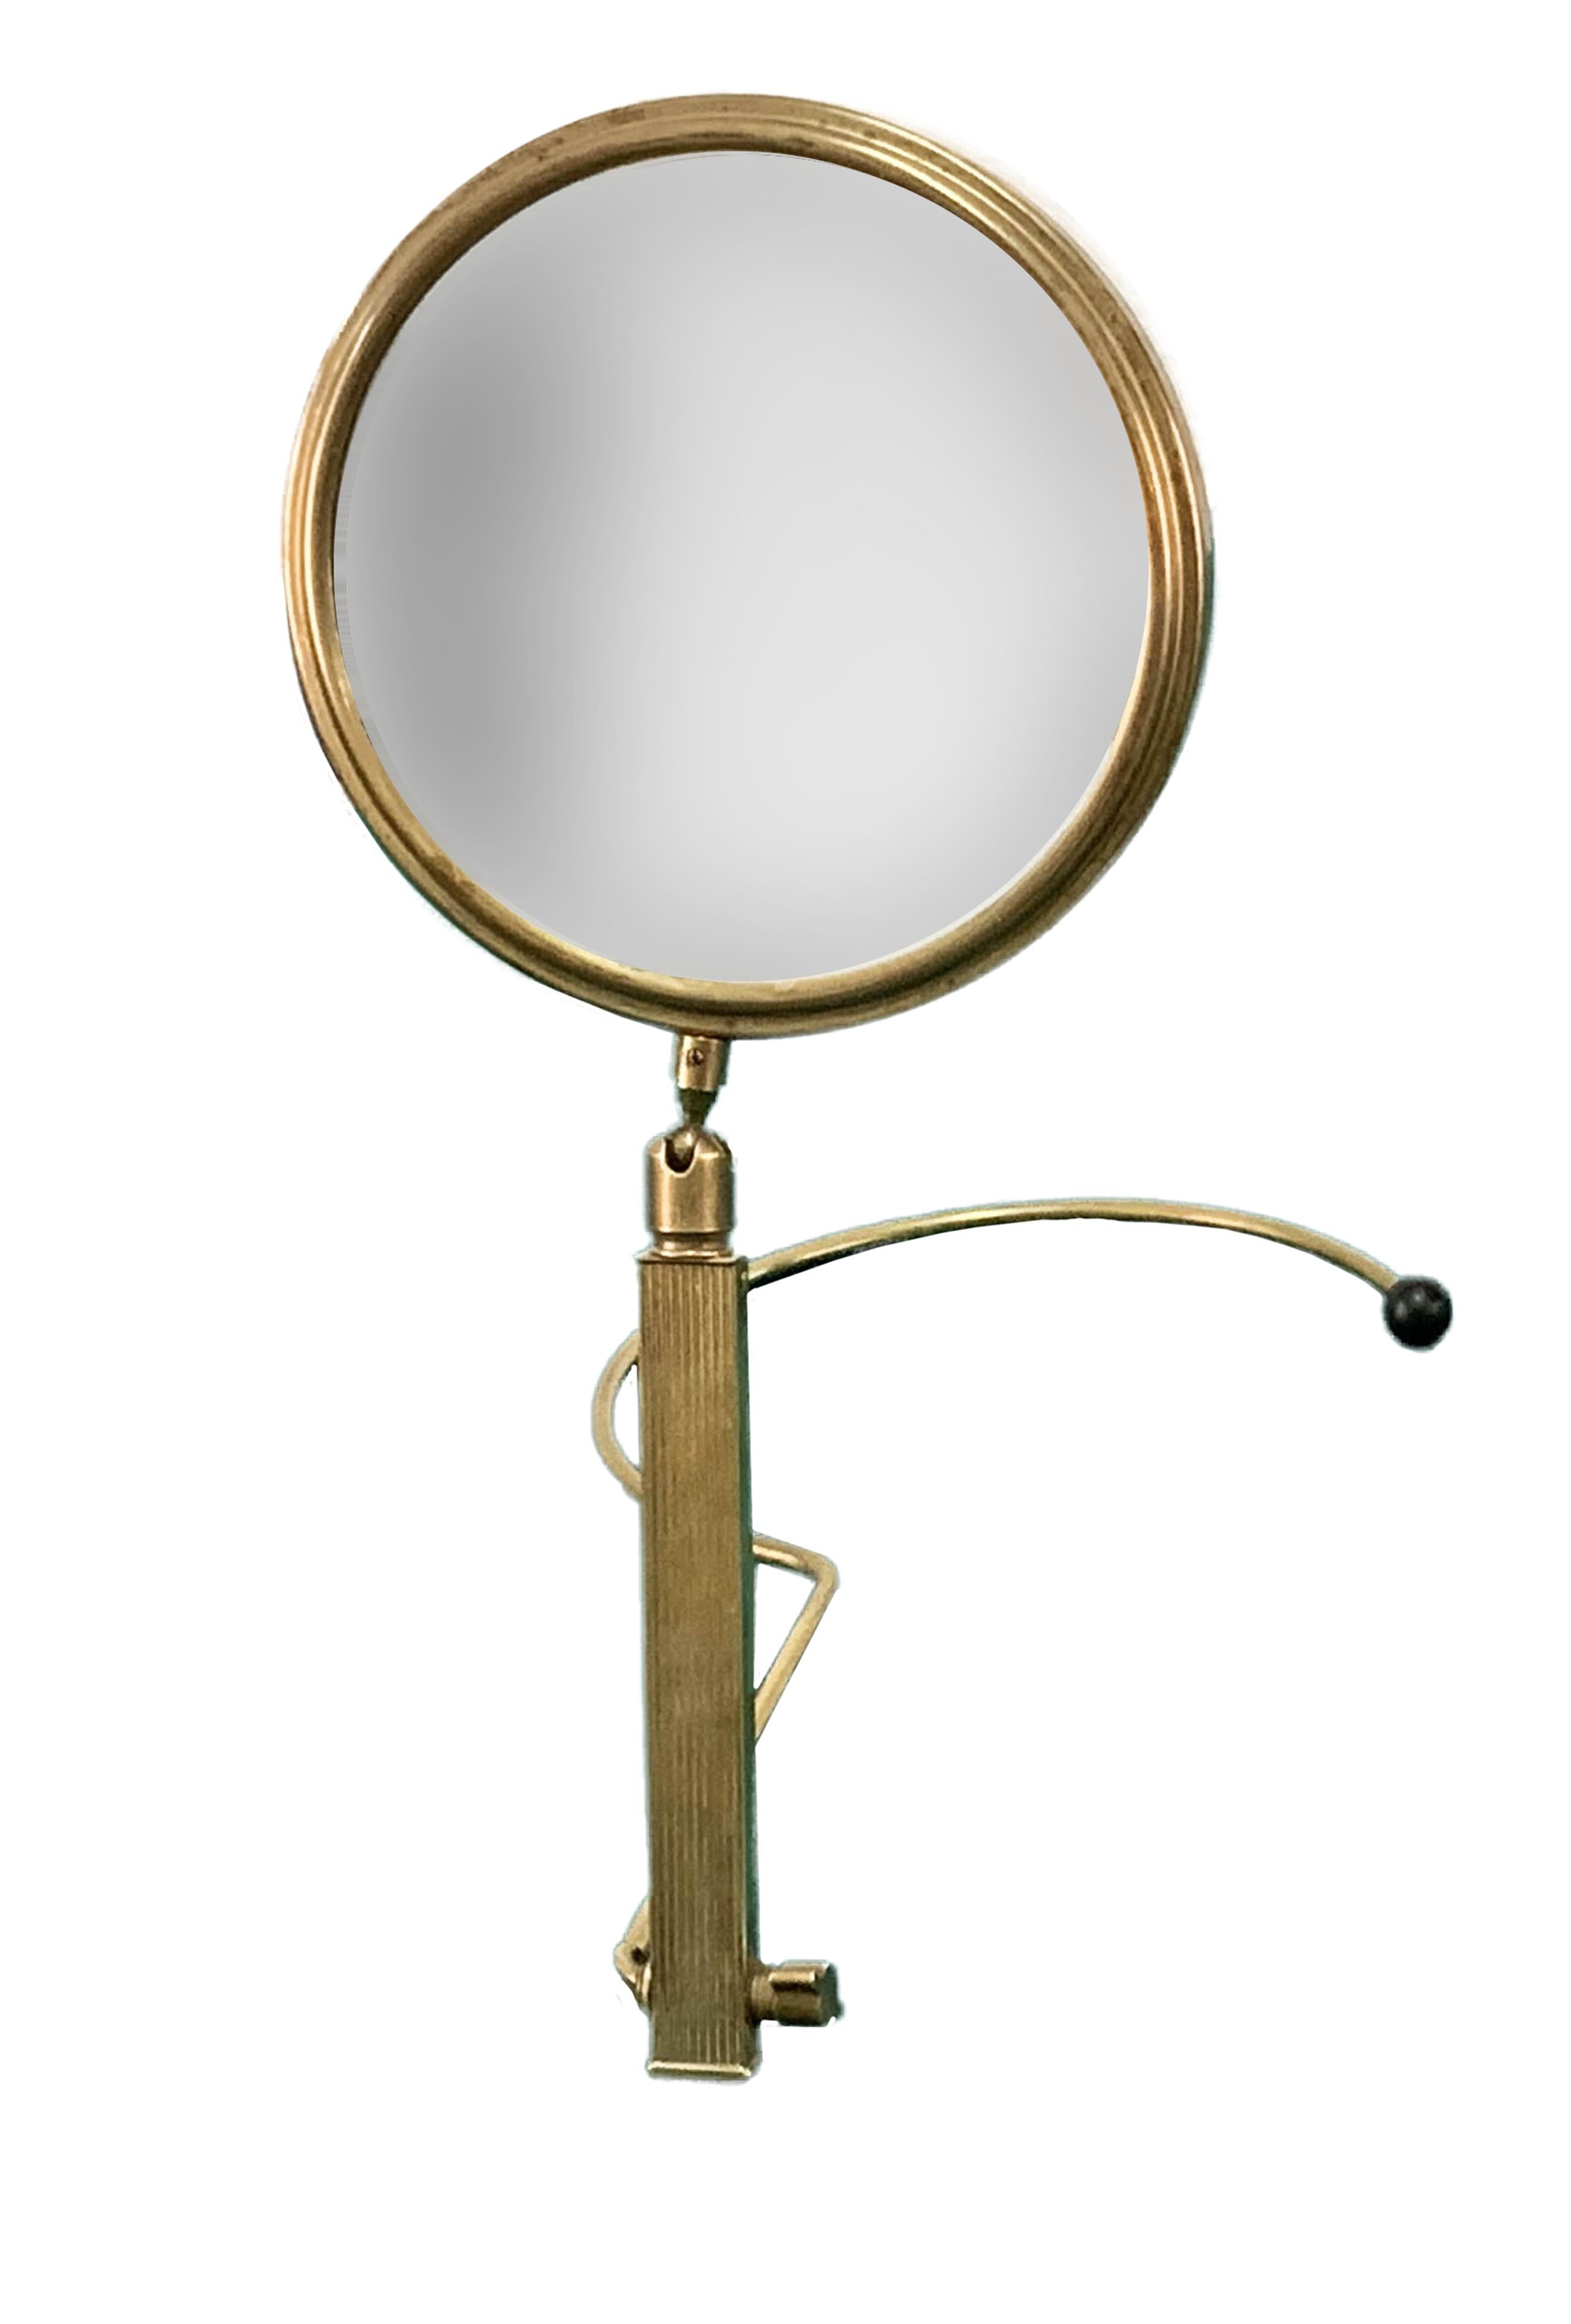 Beautiful midcentury brass table mirror, the article was produced in France during the 1950s.

This amazing piece is made of brass with an adjustable two-sides stand.

It is a wonderful item, ideal for a bathroom or a midcentury bedroom. There